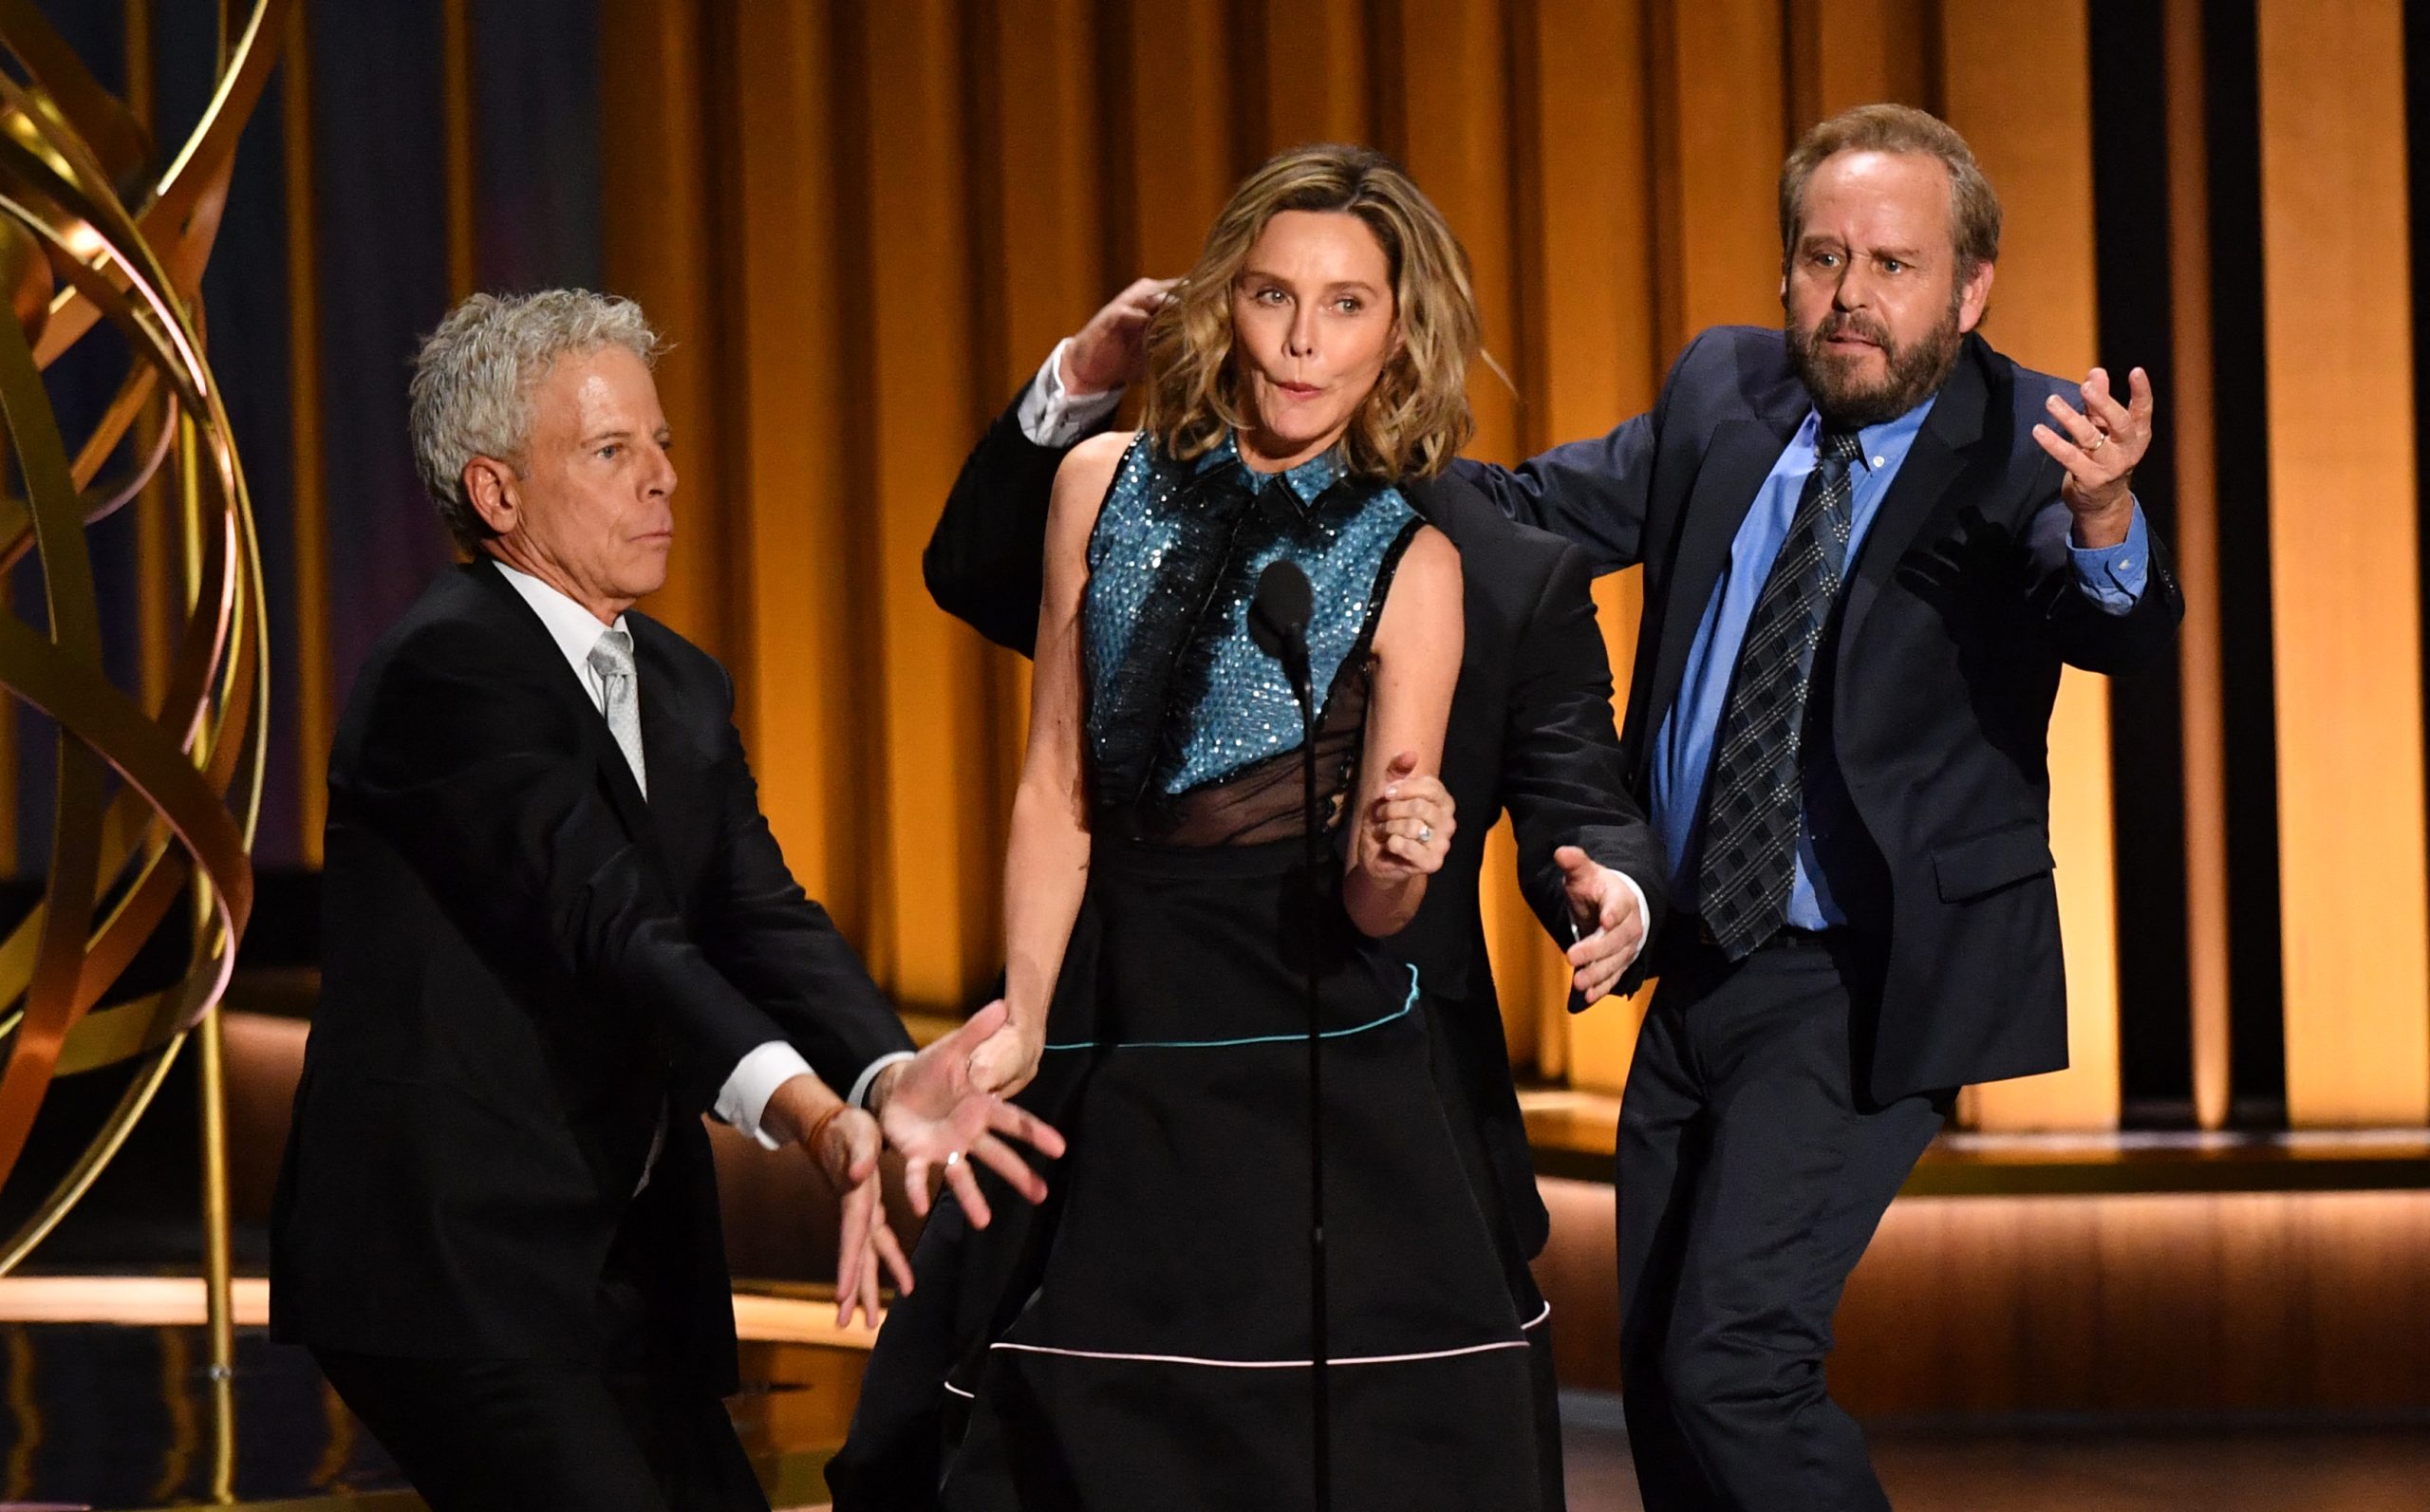 ‘Ally McBeal’ Emmys Reunion Raises Questions